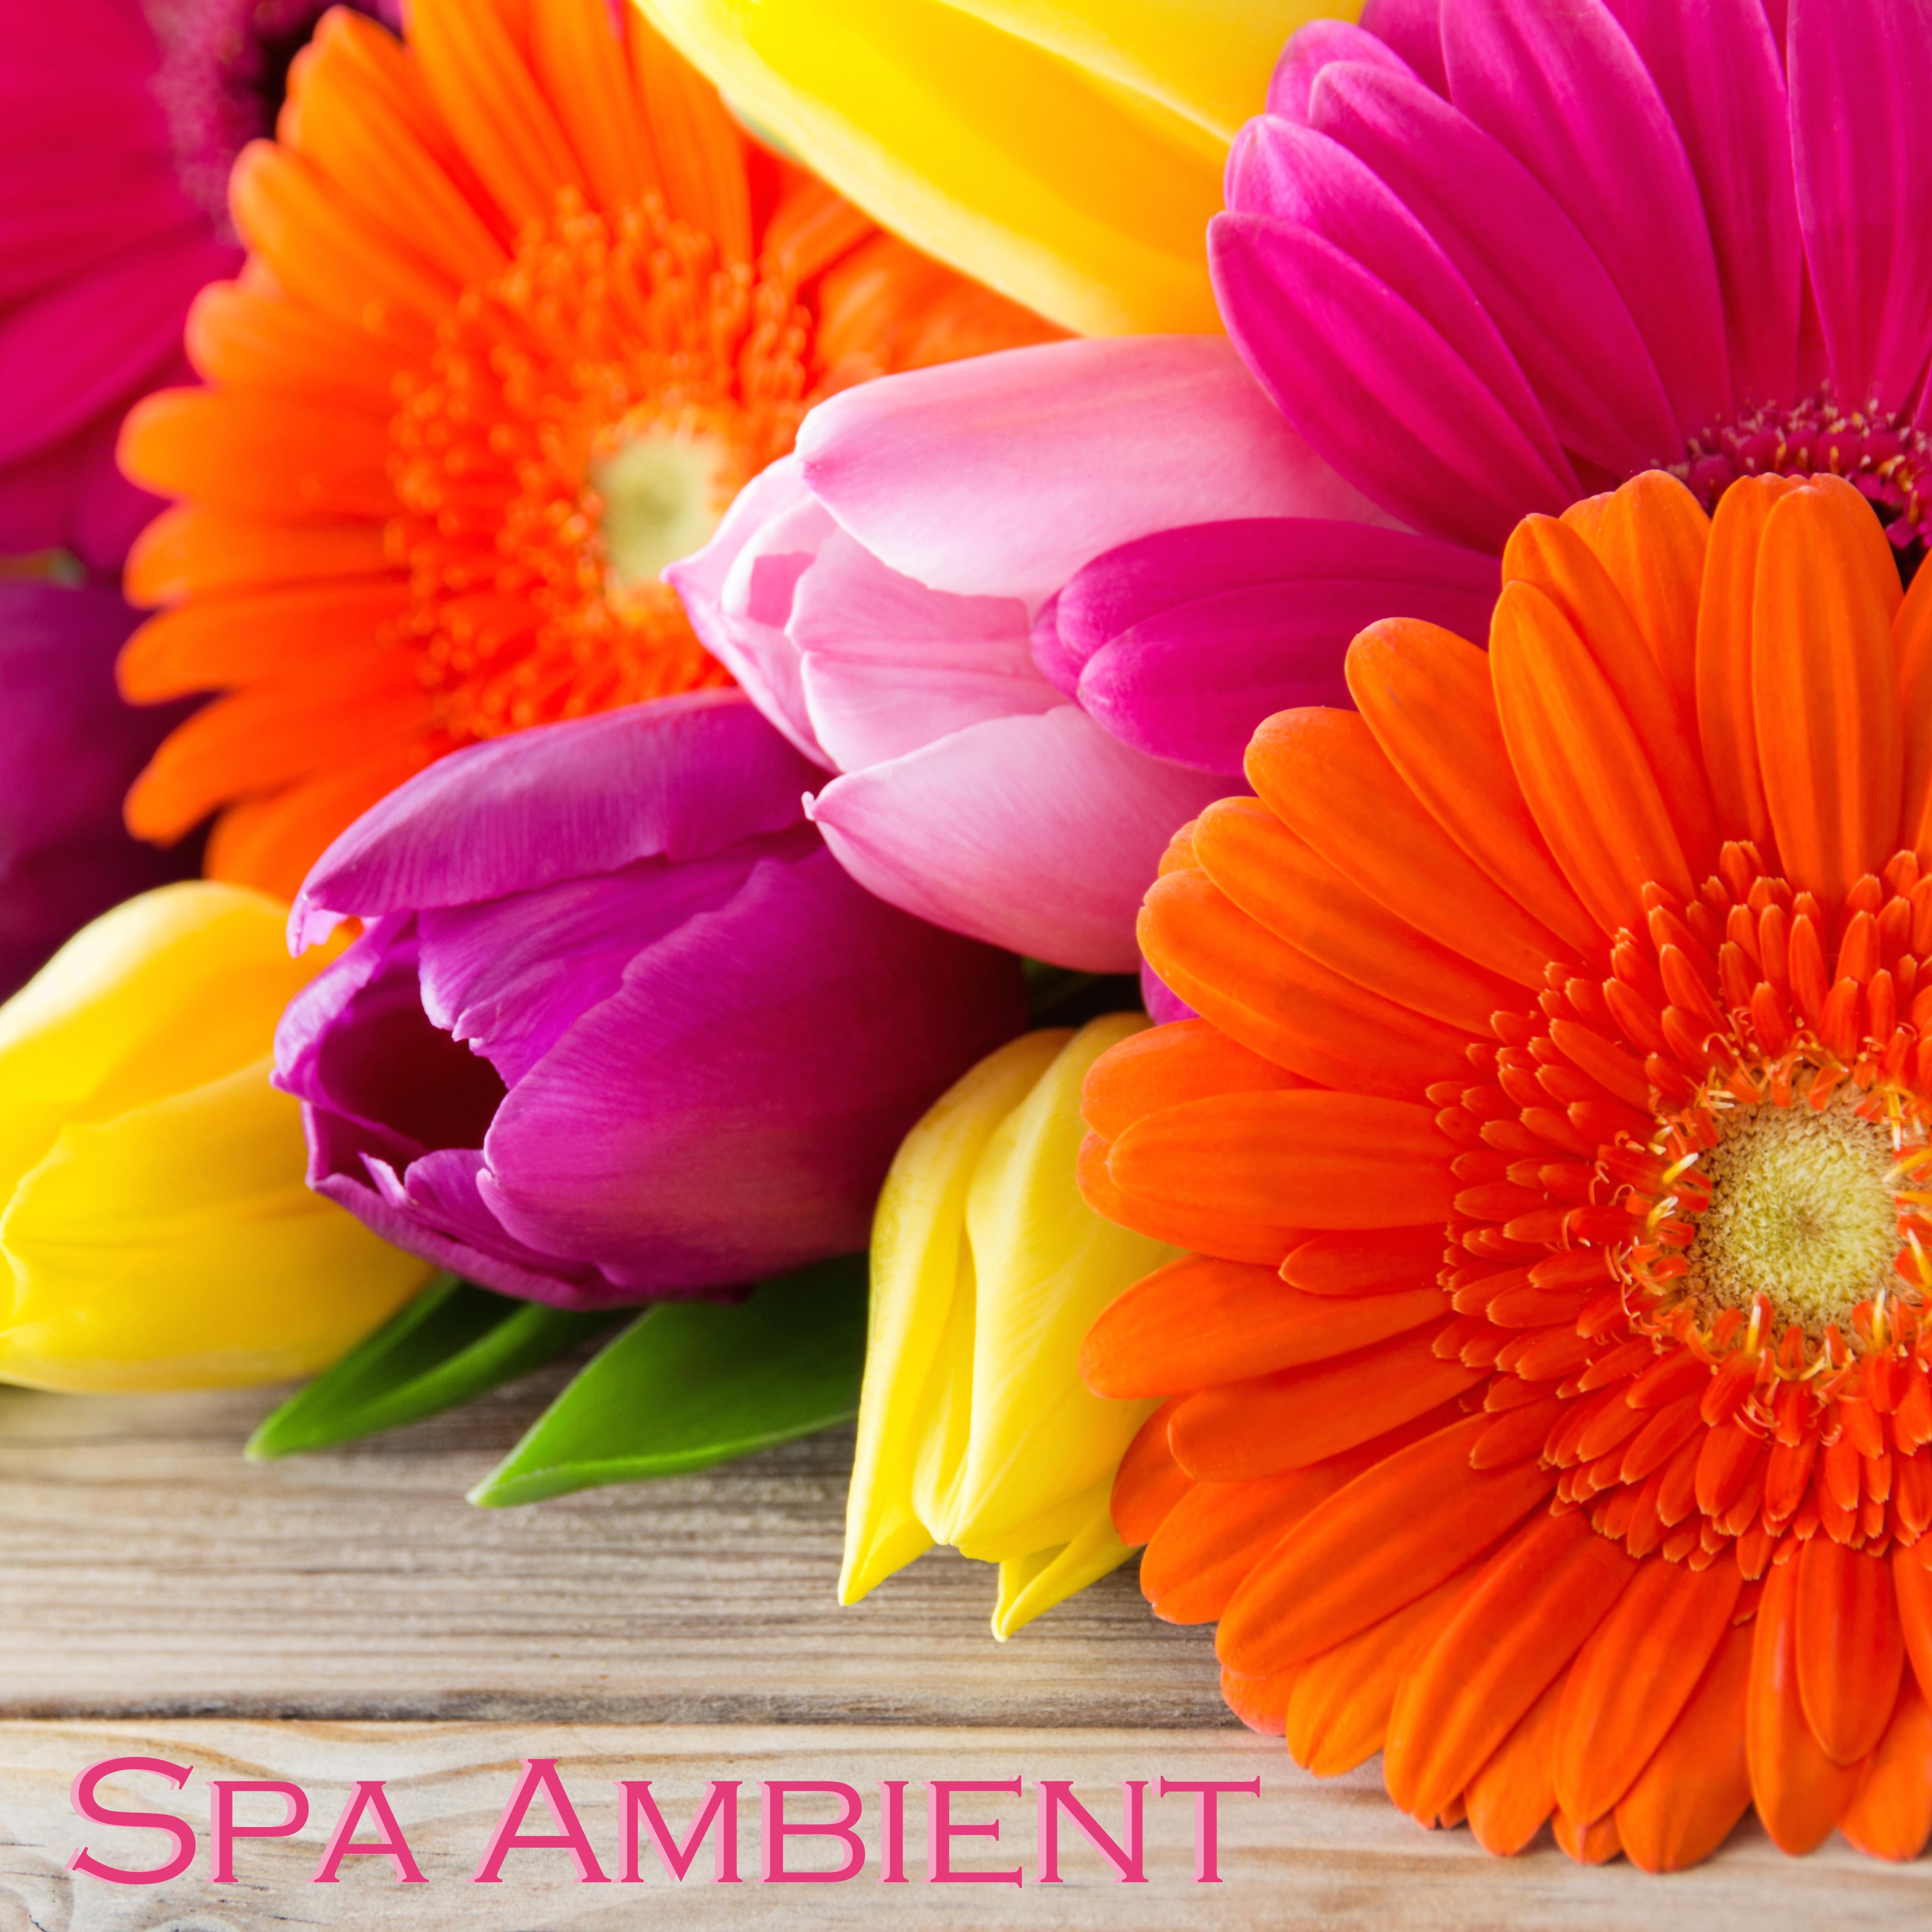 Spa Ambient - Relaxing Zen Spa Music & Background Instrumental Music for Spa Resorts, Spa Massage and Relaxation